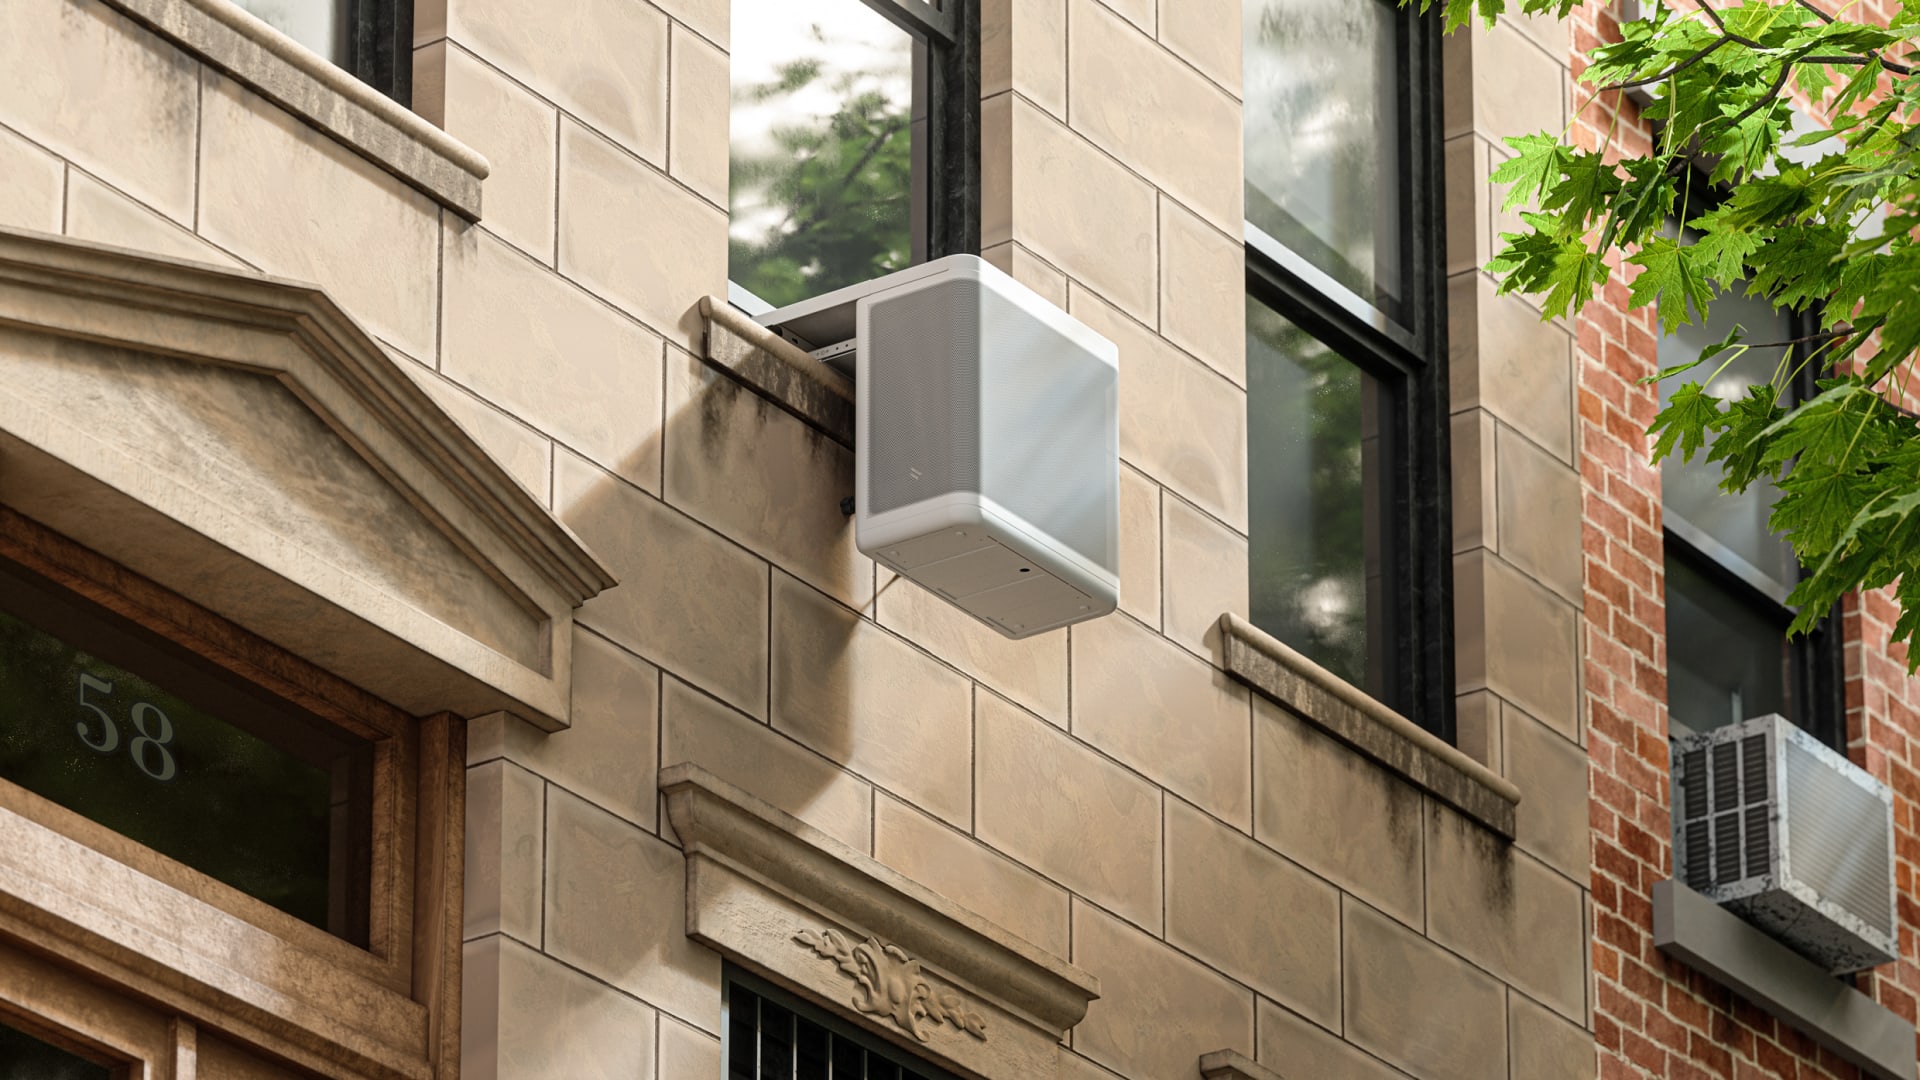 This sleek, climate-friendly cooling unit reduces the footprint of HVAC by 75%